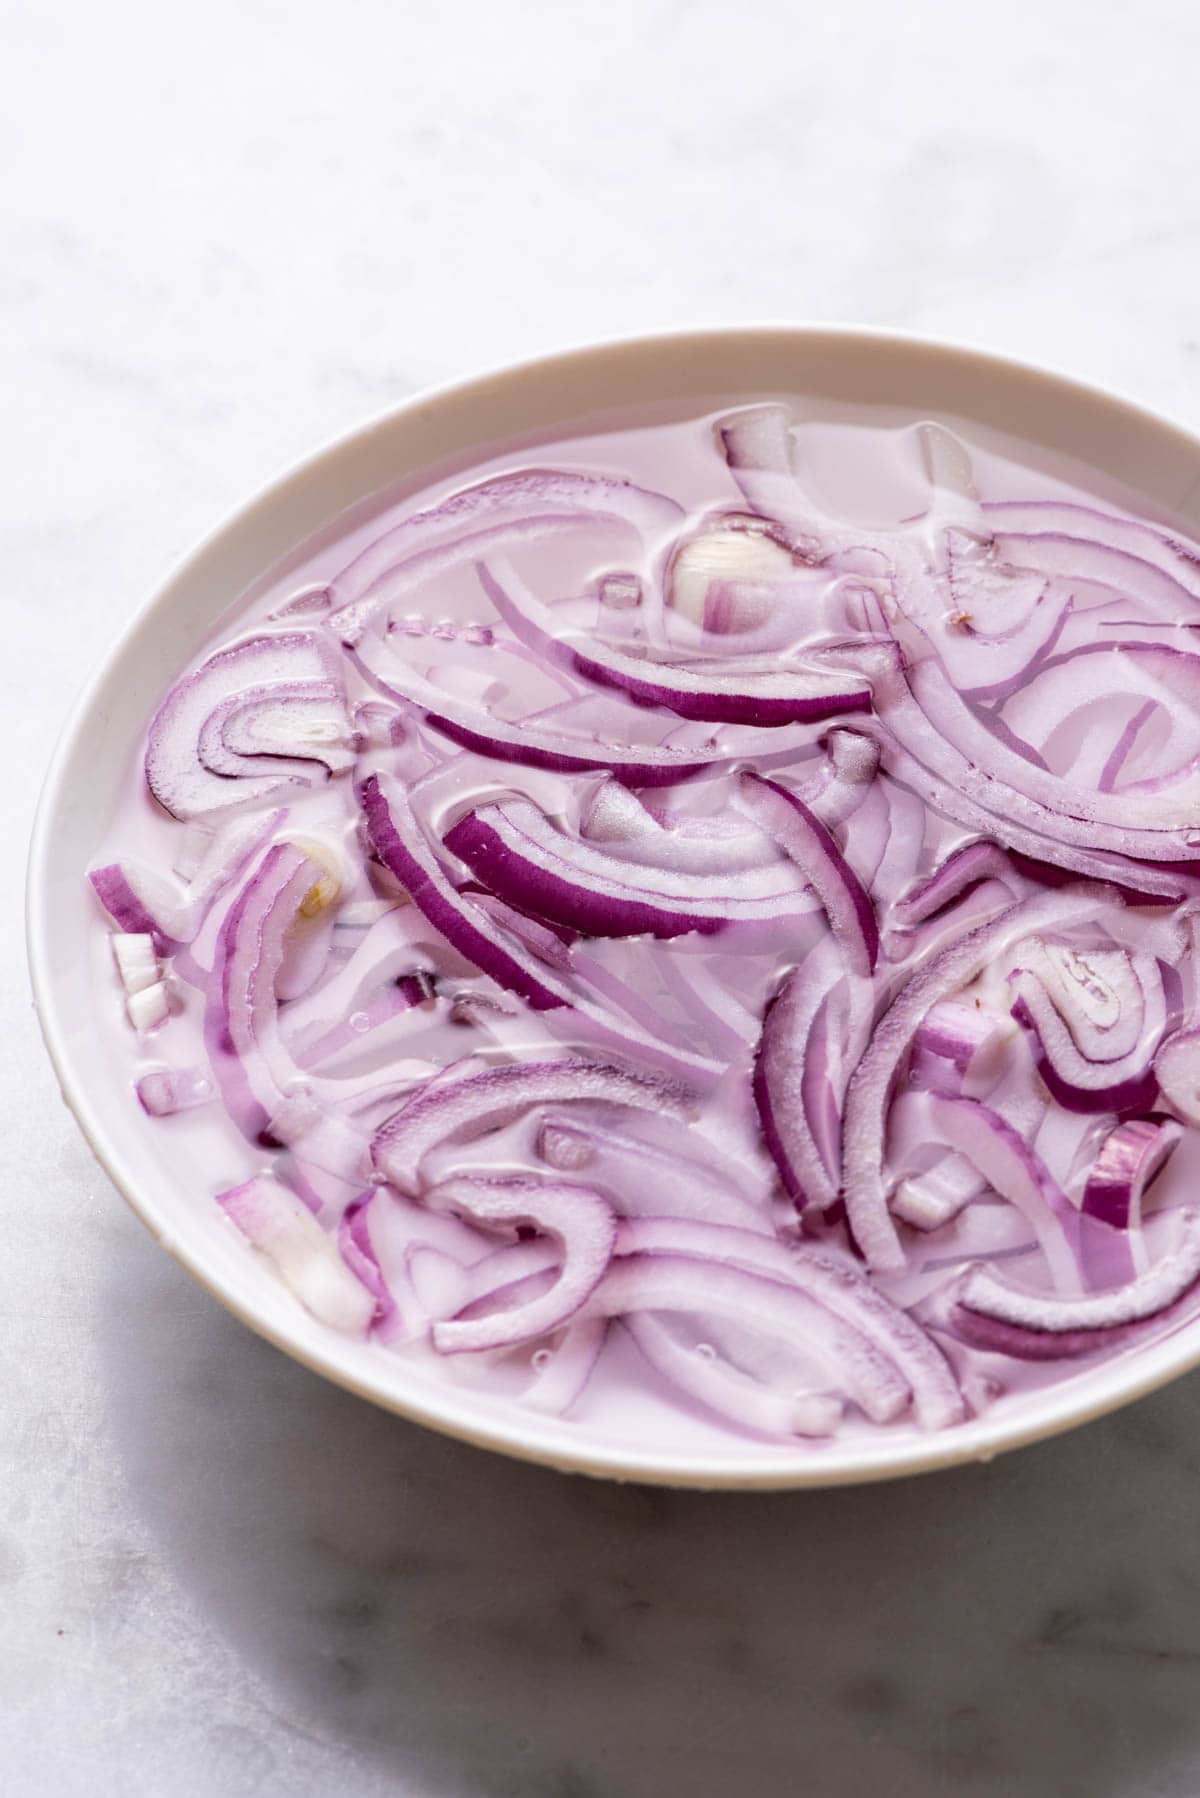 Raw red onions soaking in a bowl of water.